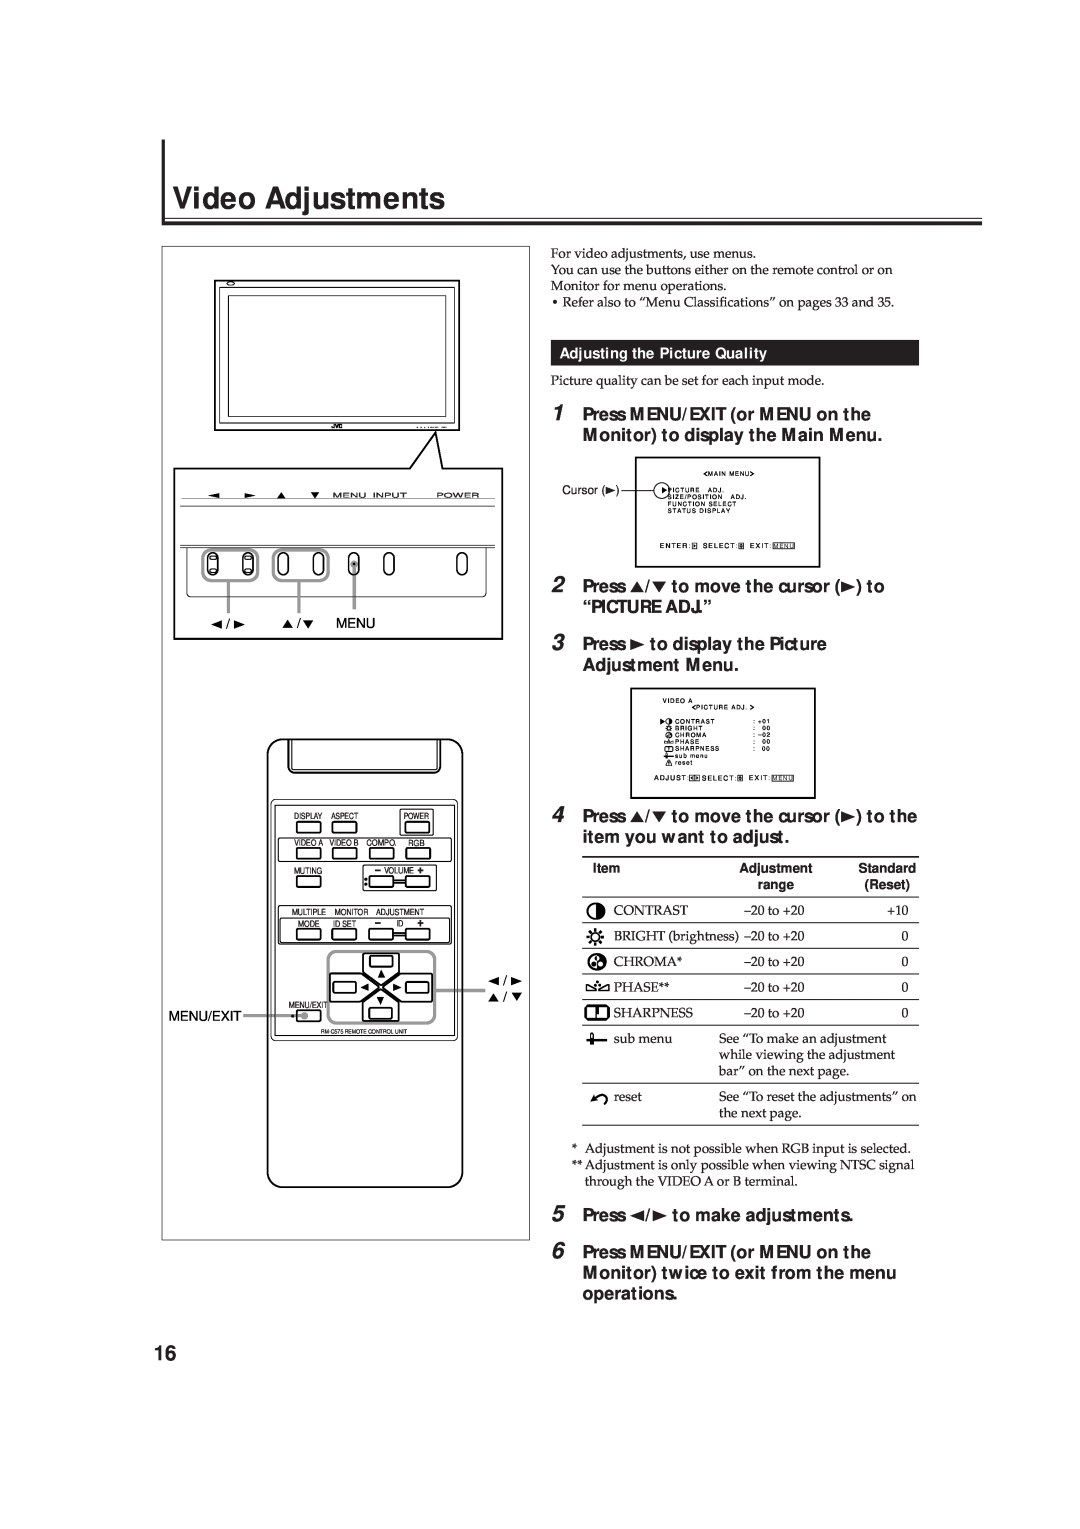 JVC GD-V4210PCE-G, GD-V4211PCE, GD-V4210PZW-G instruction manual Video Adjustments, Adjusting the Picture Quality 